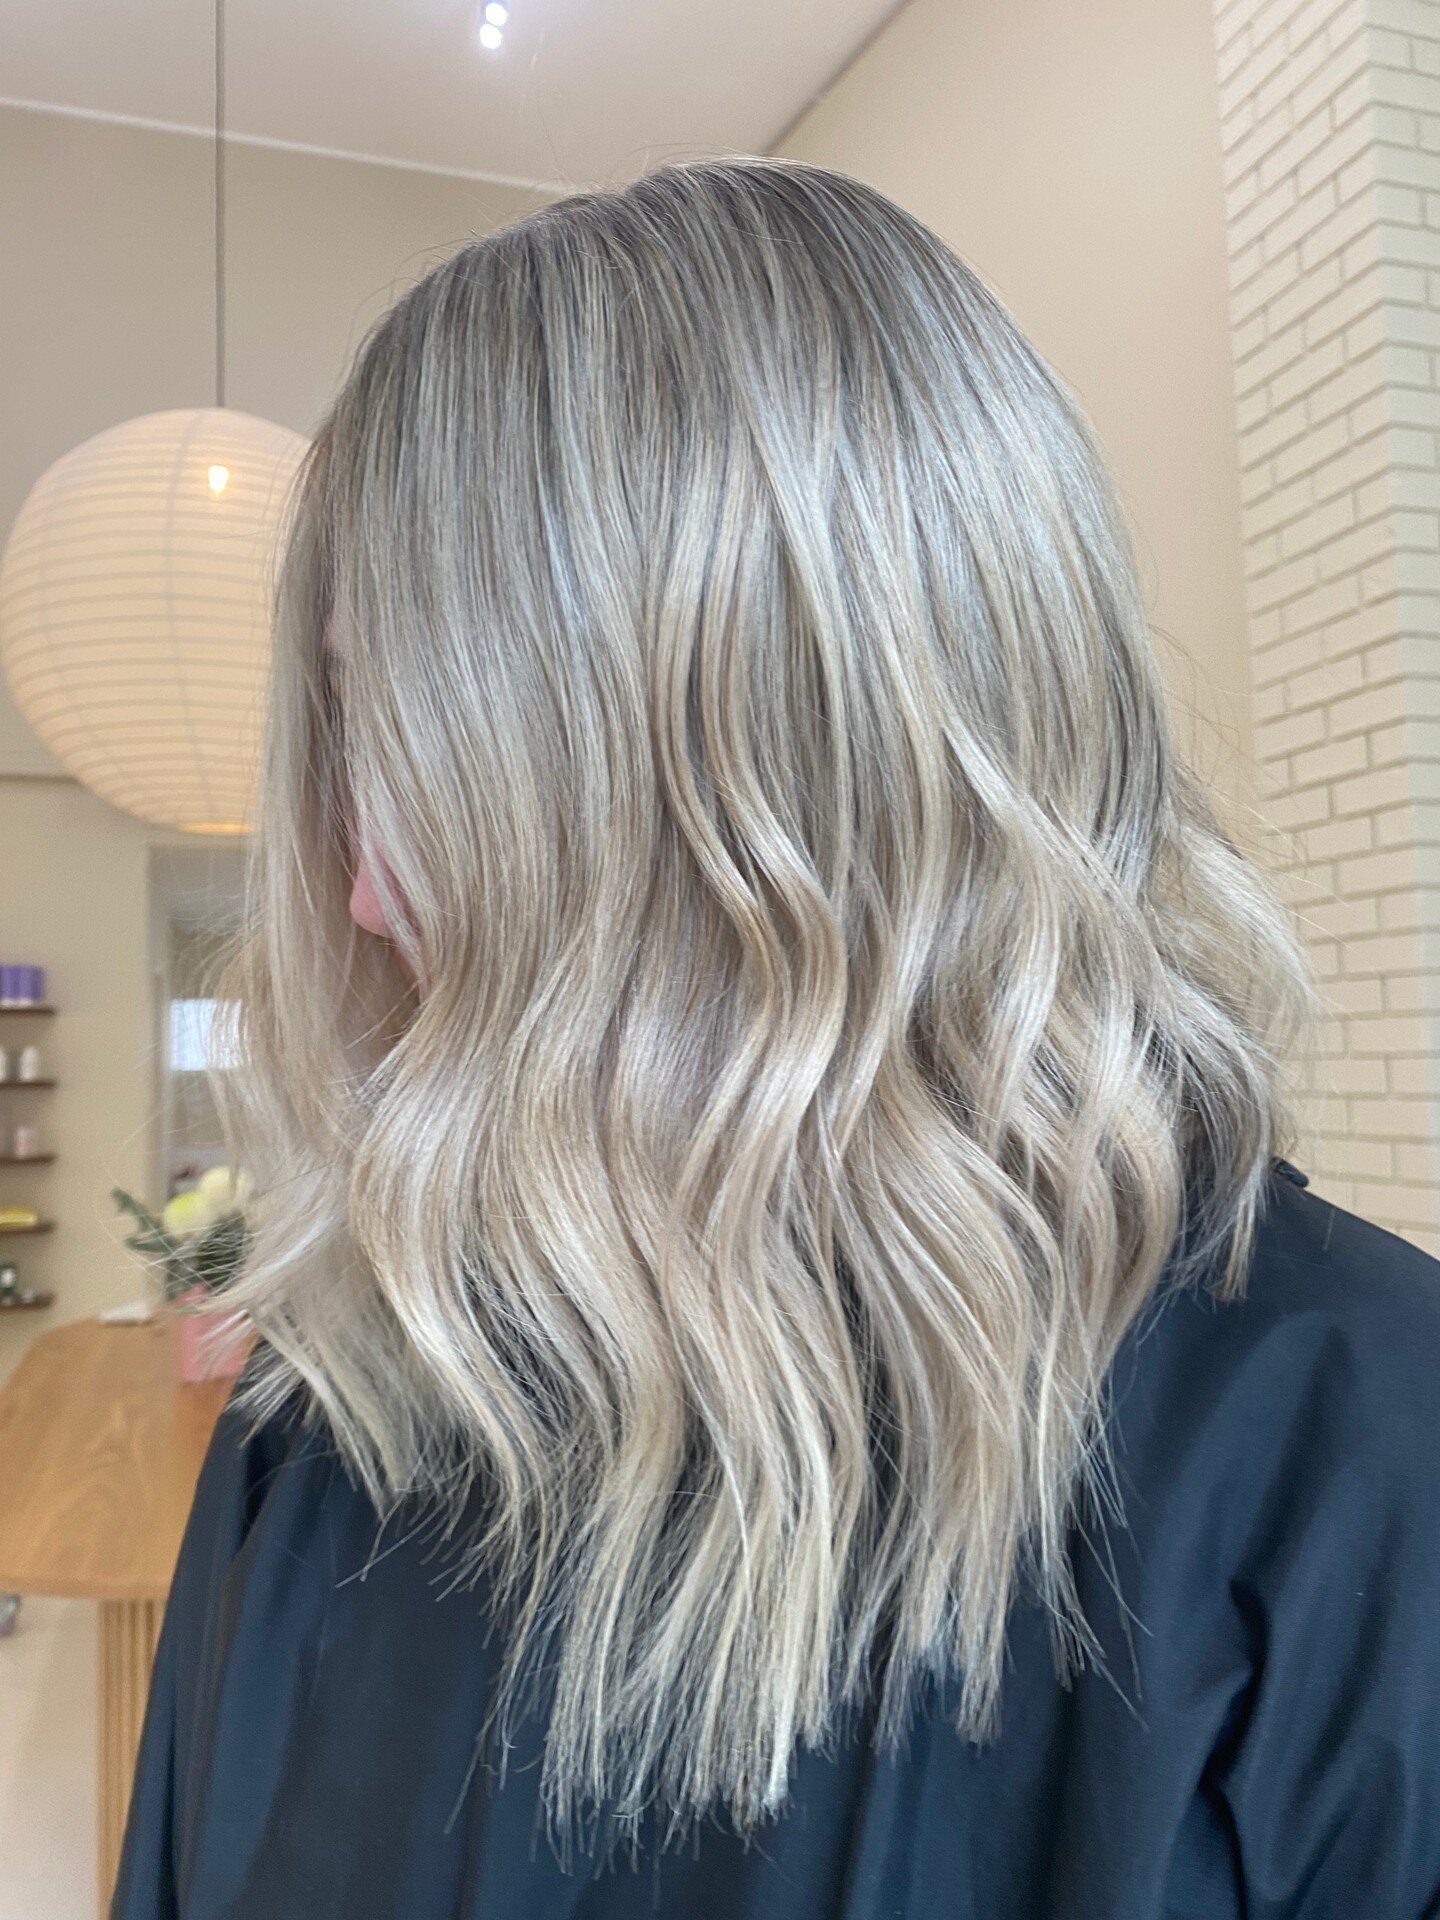 There is nothing more beautiful than healthy long blonde hair. This beautiful textural blonde was created by @gabrielle_ellestudio

*
*
*
#blondespecialist #blondebalayage #beachyblonde #livedinblonde #livedinhair #sunshinecoastsalon #buderimhairdres